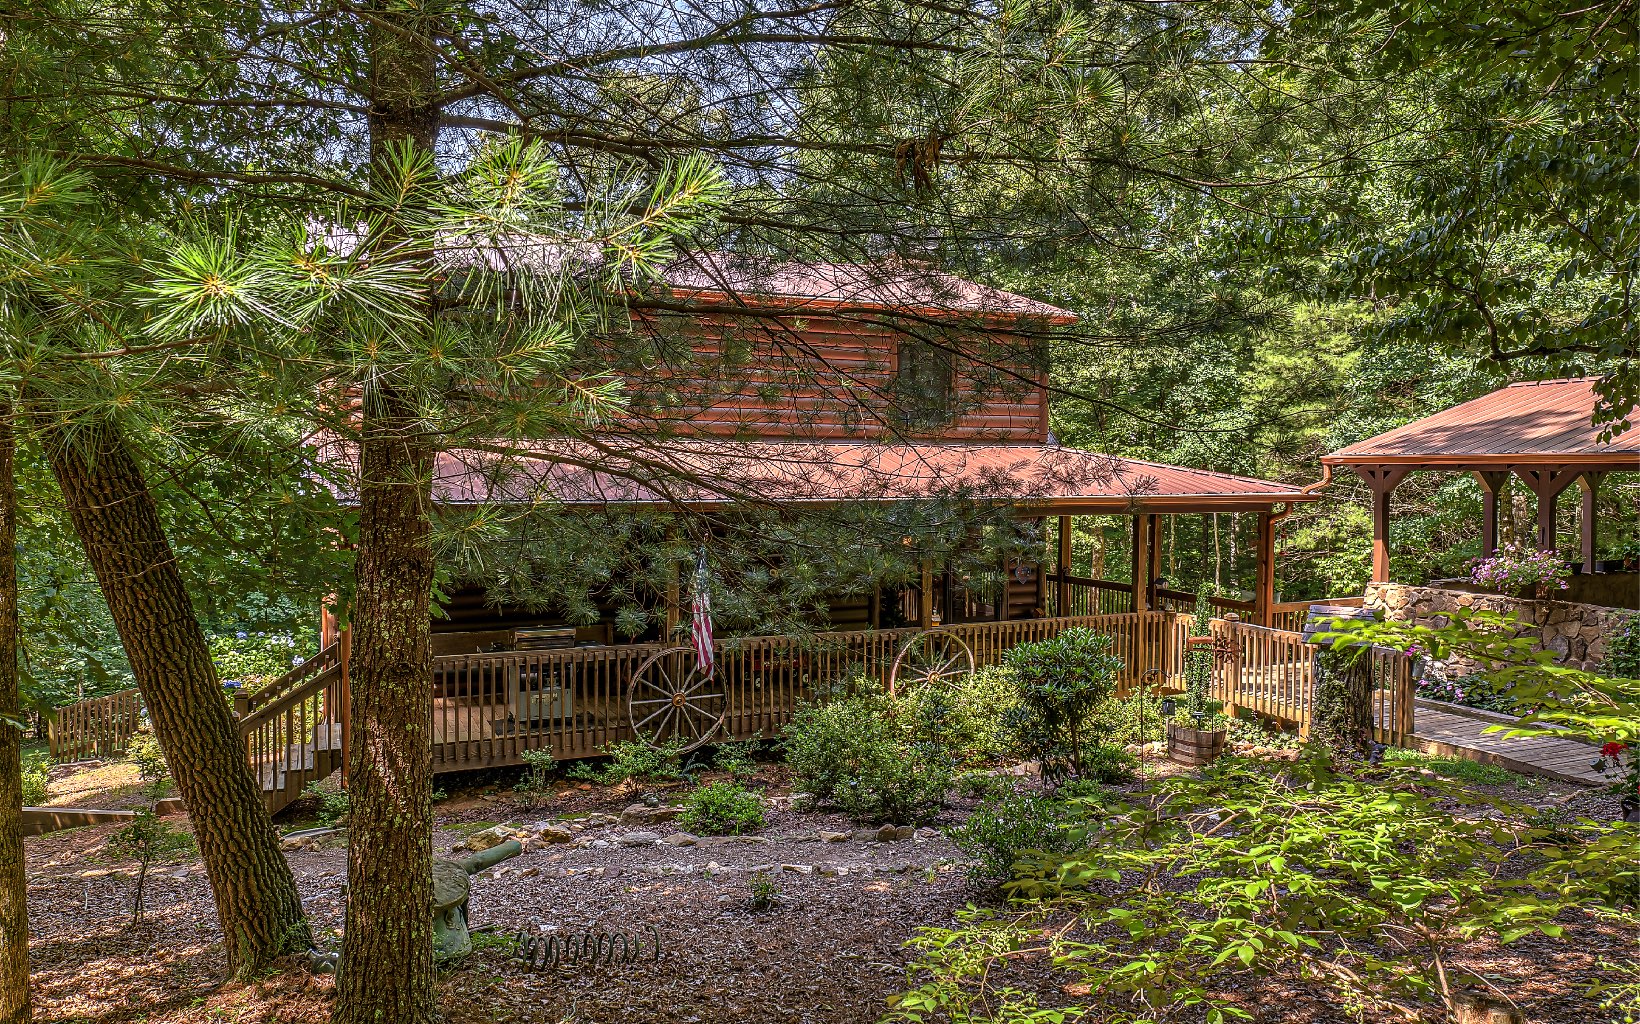 This private estate on over 5 acres features a custom built cabin, a guest cabin, large workshop & more. If you are looking for a gorgeous setting & privacy, this is it. Just driving up the driveway feels like you’re in a park, with the cabin's gardens, porch that wraps around 3 sides, new metal roof, extended porches, an oversized carport w/ stone features, & walking trails. Inside is an open living area w/ a vaulted ceiling, tall masonry fireplace, Windsor windows, kitchen w/ bar & log features, 2 bedrooms, a loft library/office, wood beam ceilings, large bathrooms with custom vanities, tile shower, double vanity, walk in closet, and more. The basement is unfinished but has a bathroom and is ready for an additional bedroom and game/family room. This cabin is very well maintained, whole house generator, 3 septic systems, fiber internet, new hvac, and seasonal mountain view. This property is 4 miles from Springer Mountain and located in between Ellijay and Blue Ridge.